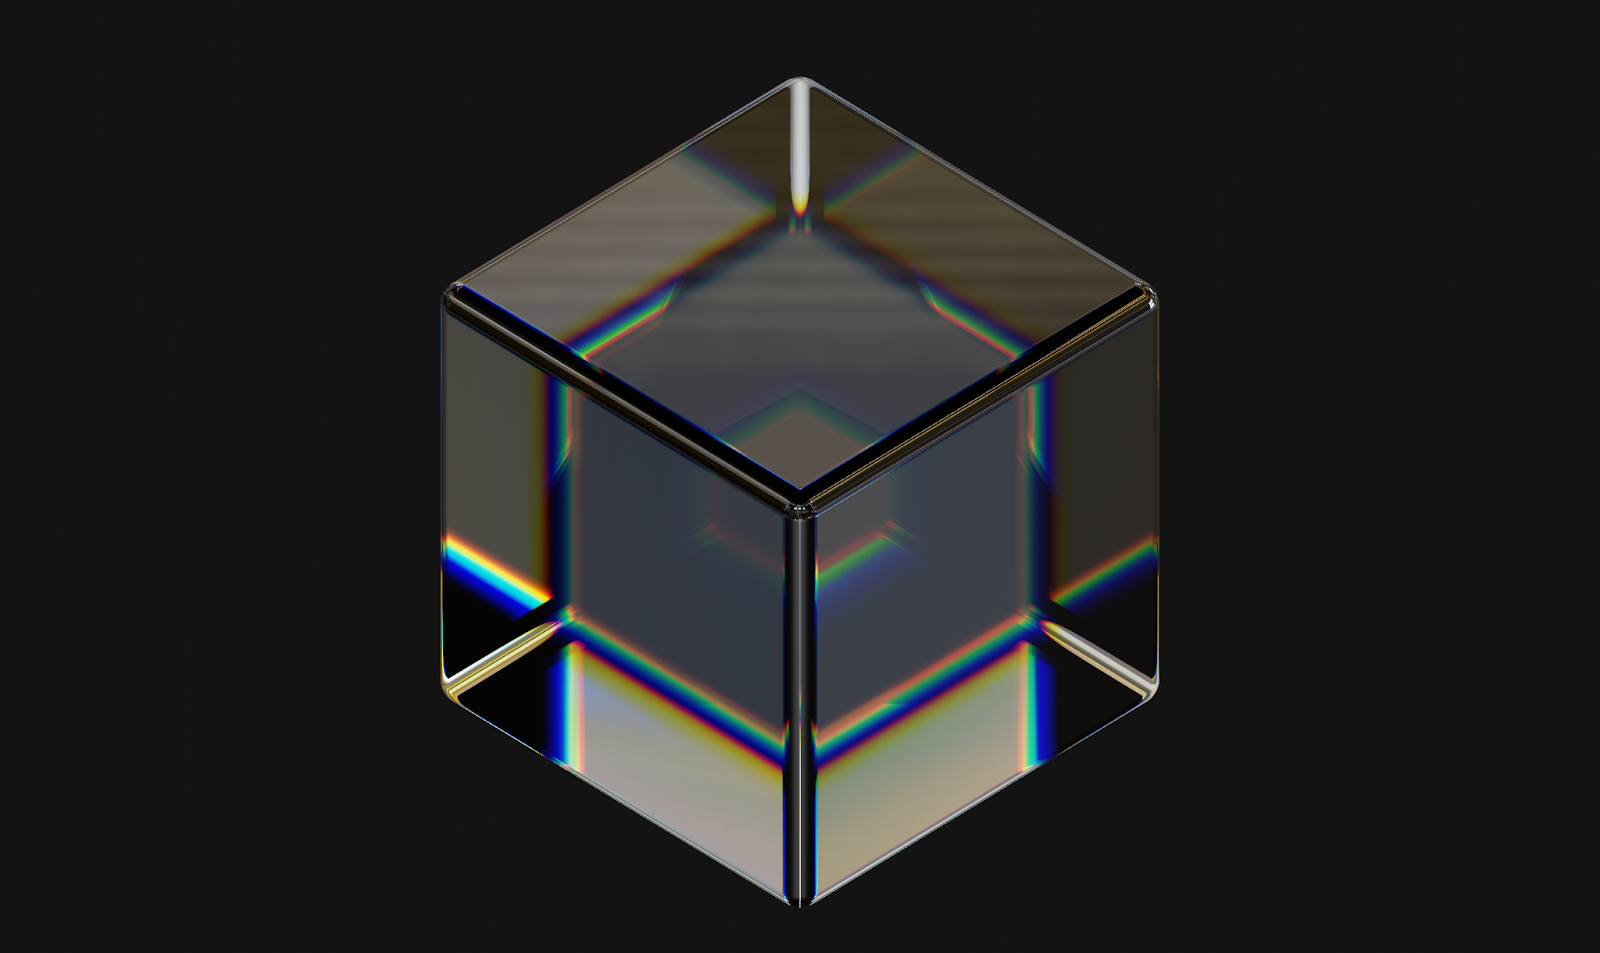 An image of movement's logo: a reflective glass cube. 